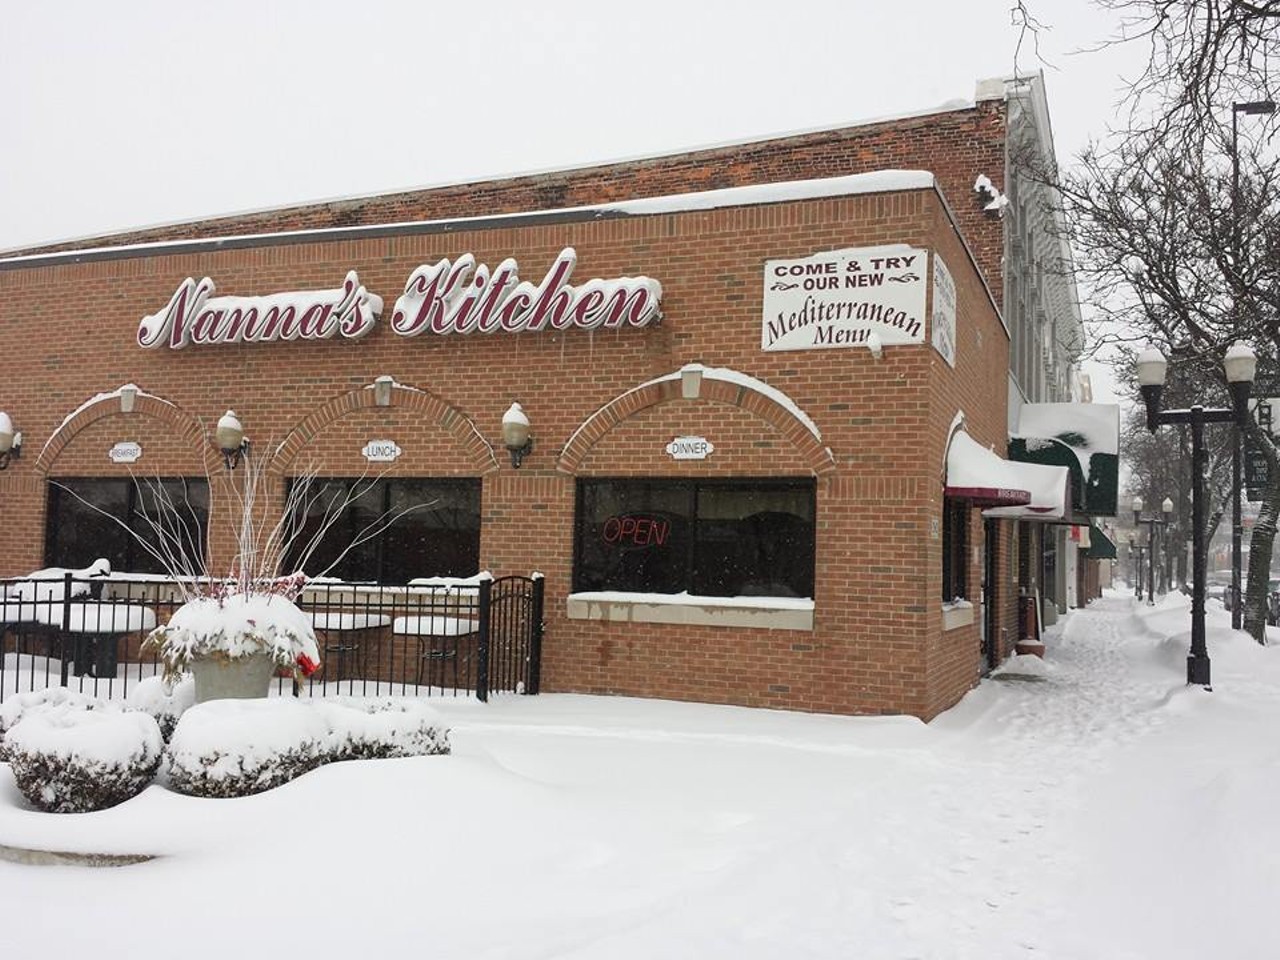 Nanna&#146;s Kitchen
2962 Biddle Ave., Wyandotte; 734-281-9093
Owners Atef (Steven) and Mary Mikhail&#146;s had a dream of owning a &#147;mom & pop&#148; diner, and today their restaurant is beloved by Downriver residents. This Wyandotte spot serves comforting meals like meatloaf, fried chicken, roast beef, and pot roast, plus breakfast and sandwiches. 
Photo via Facebook user Nanna&#146;s Kitchen